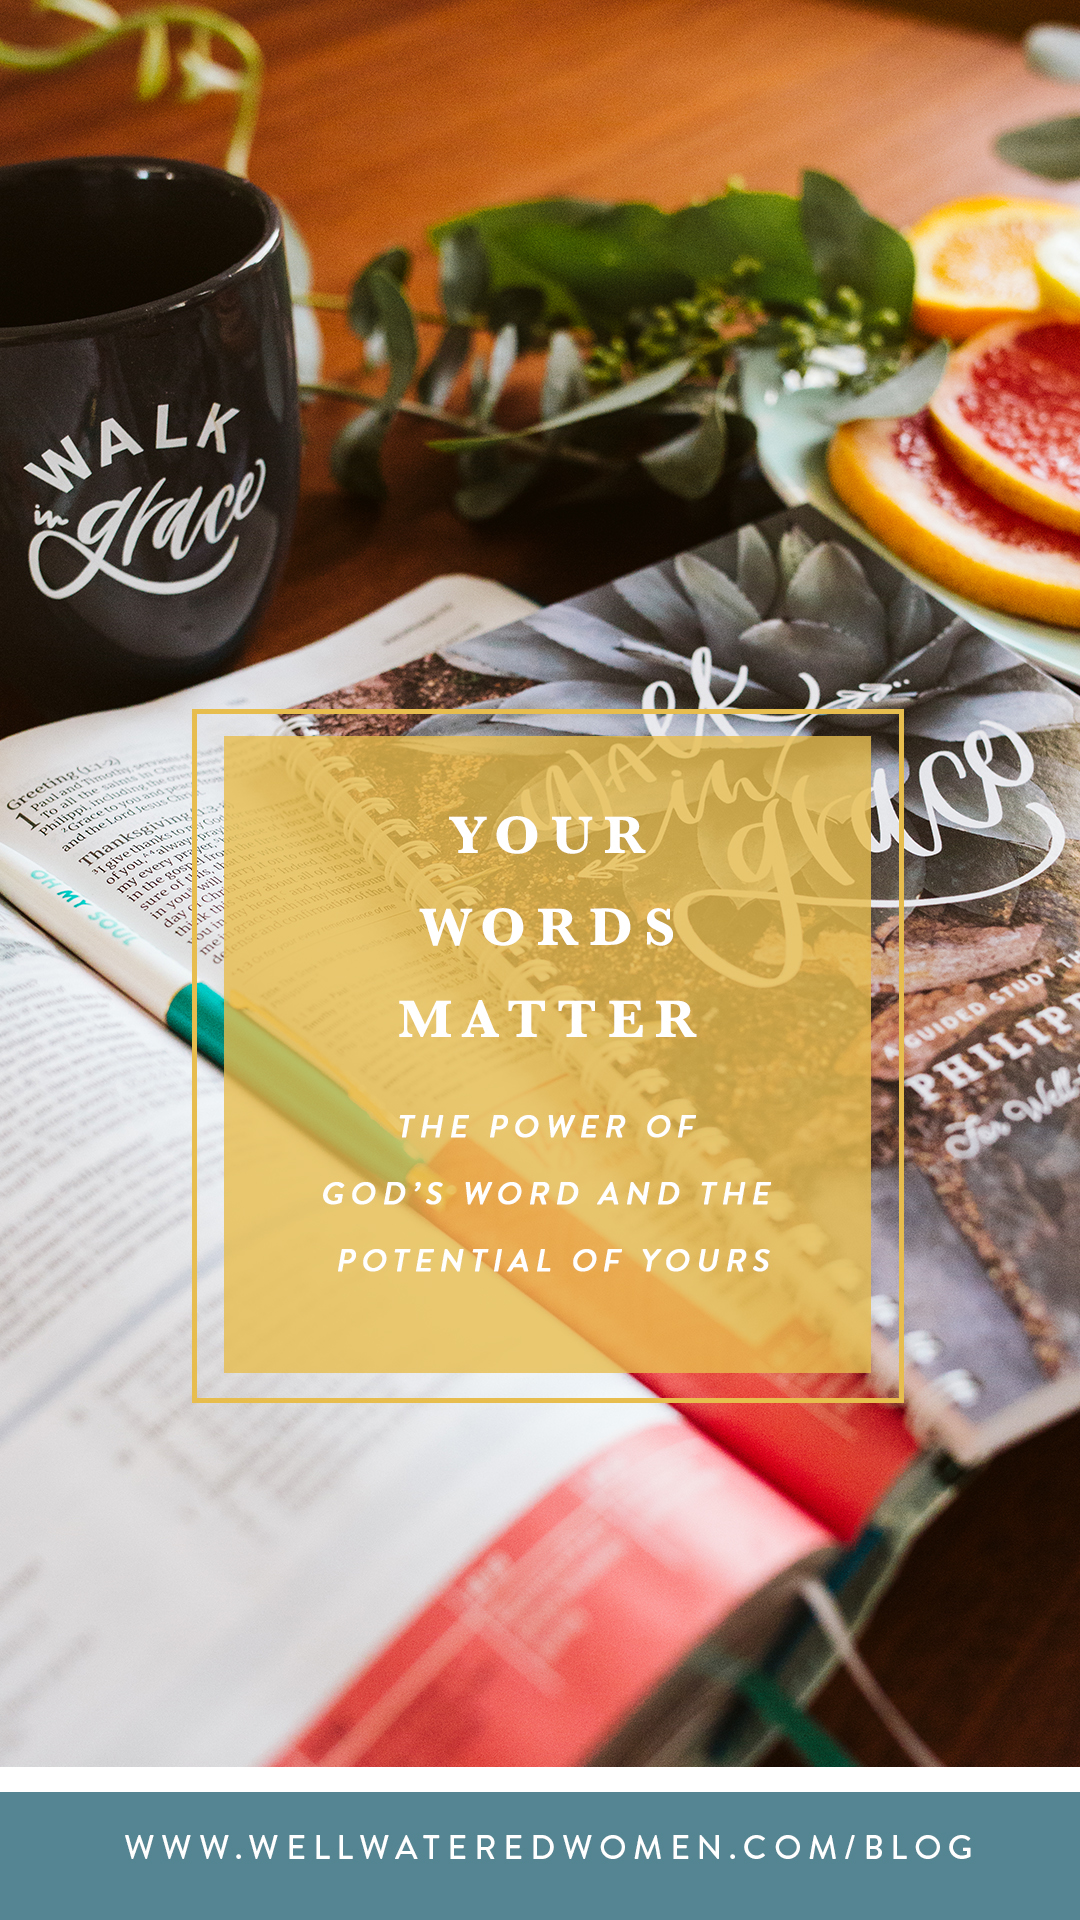 Your Words Matter: The Power of God's Word and the Potential of Yours (Blog on Well-Watered Women)